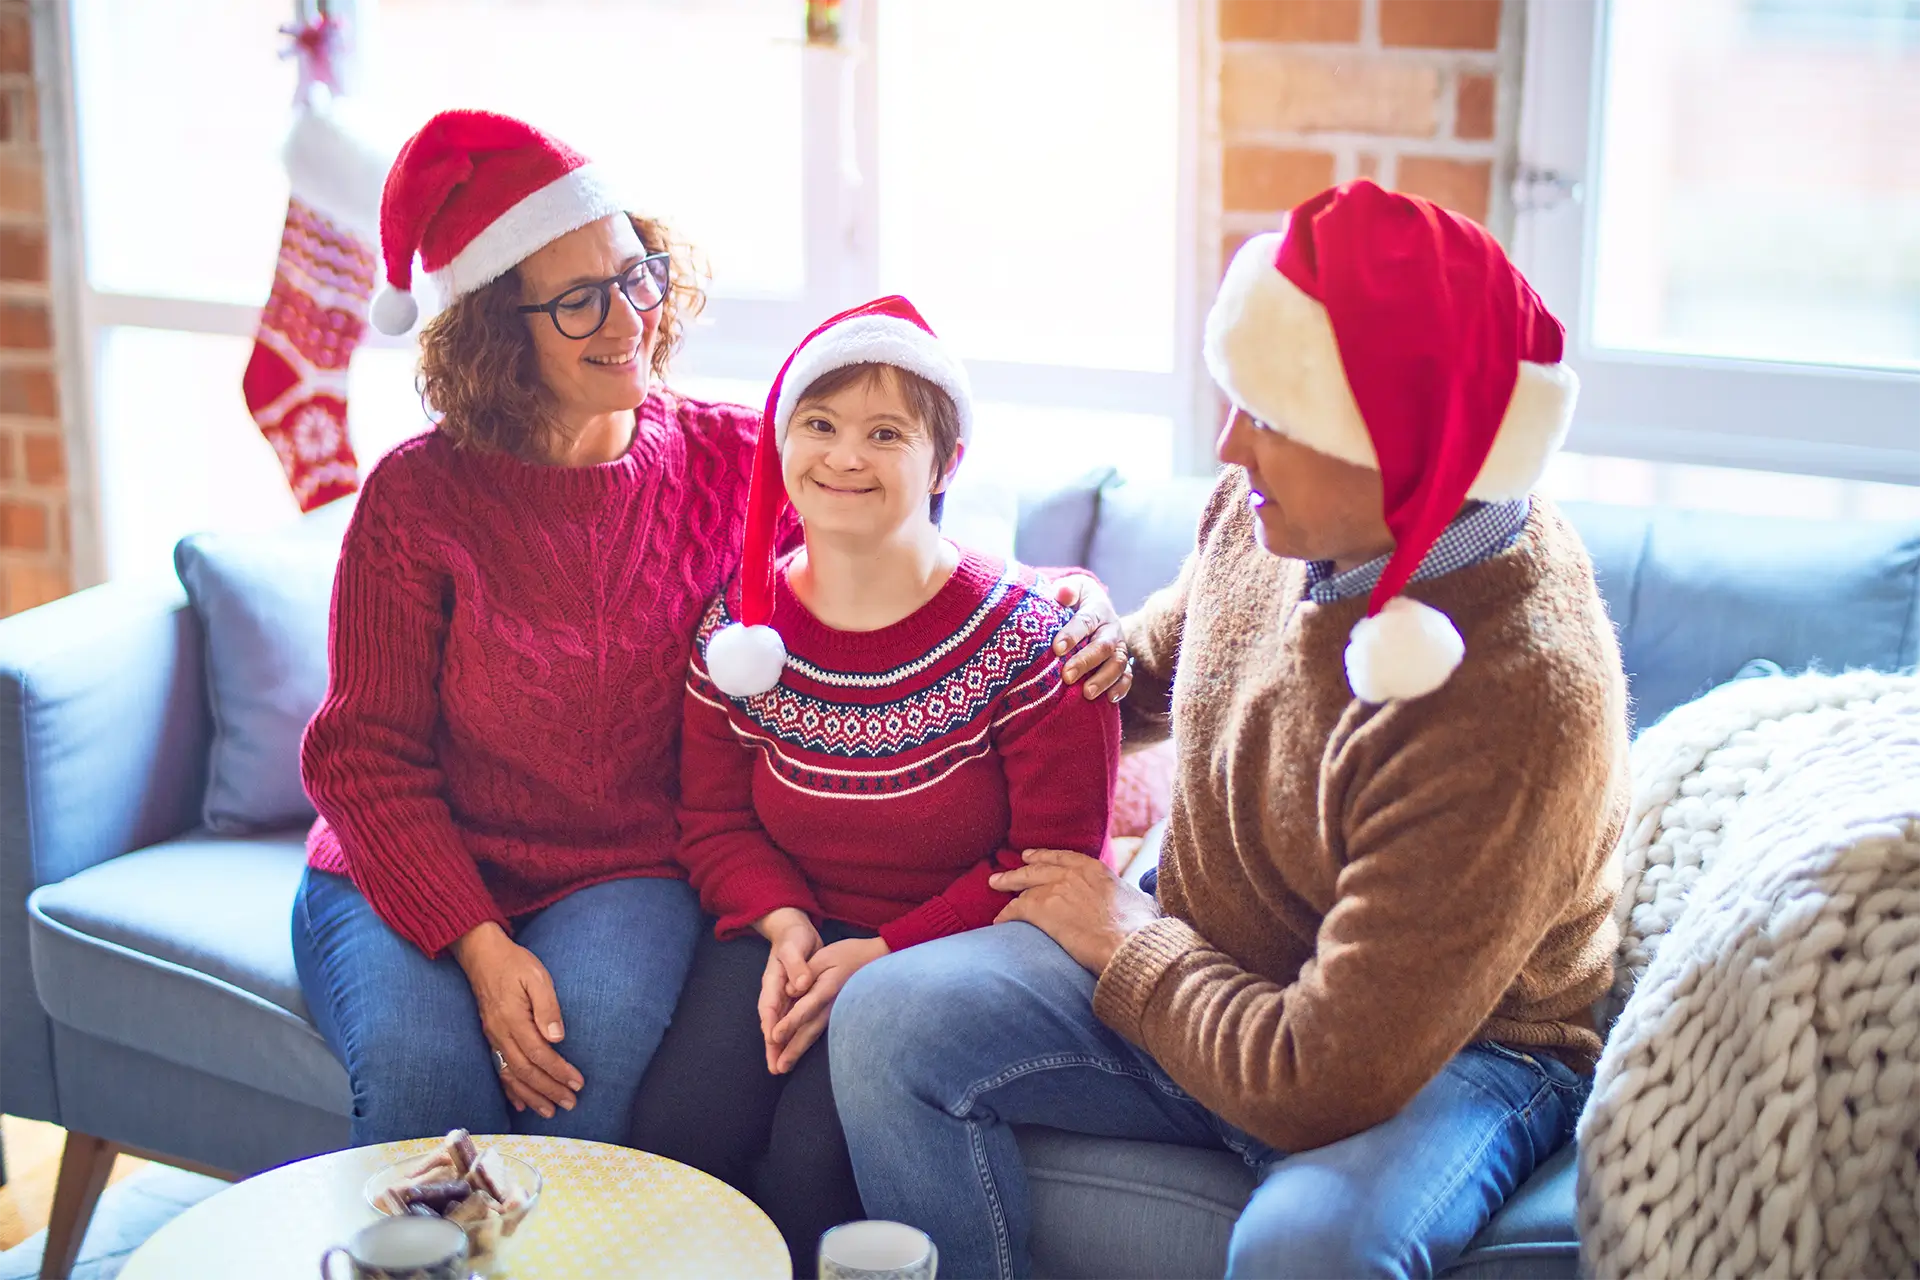 Three people sitting on a couch wearing Santa hats.